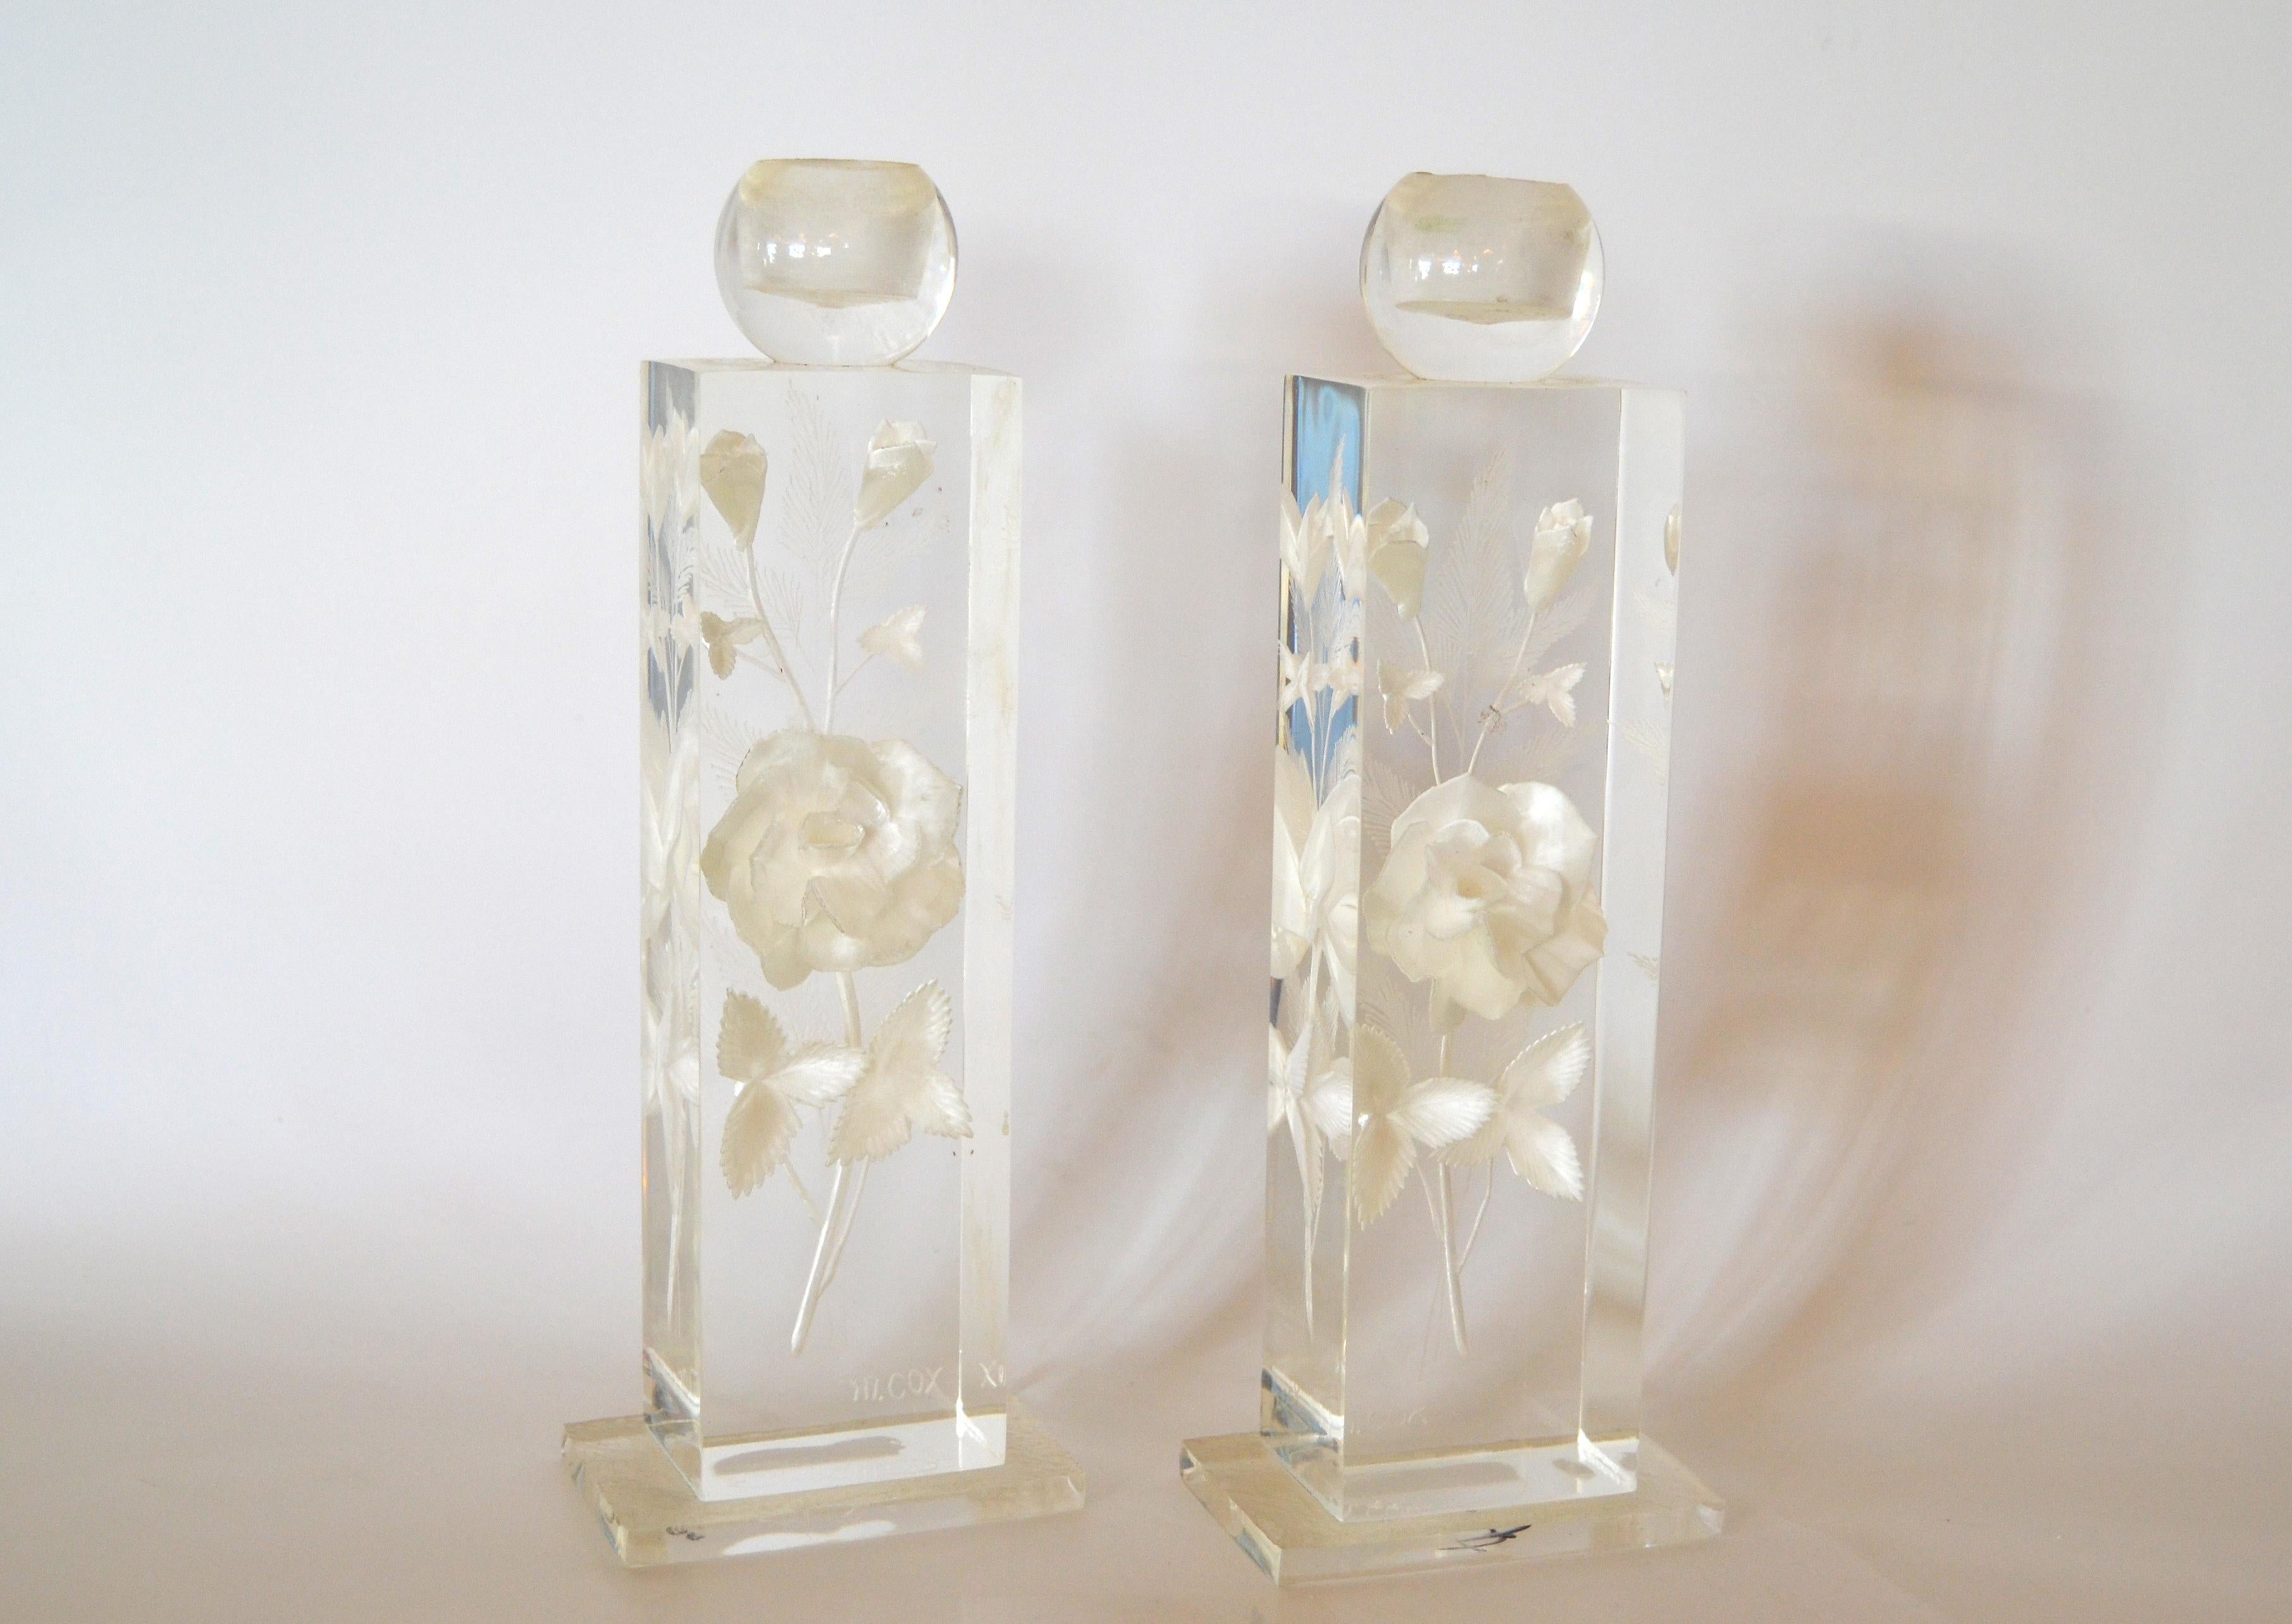 Resin M. Cox Art Deco Clear Acrylic & White Flowers Candleholders, Candlesticks, Pair